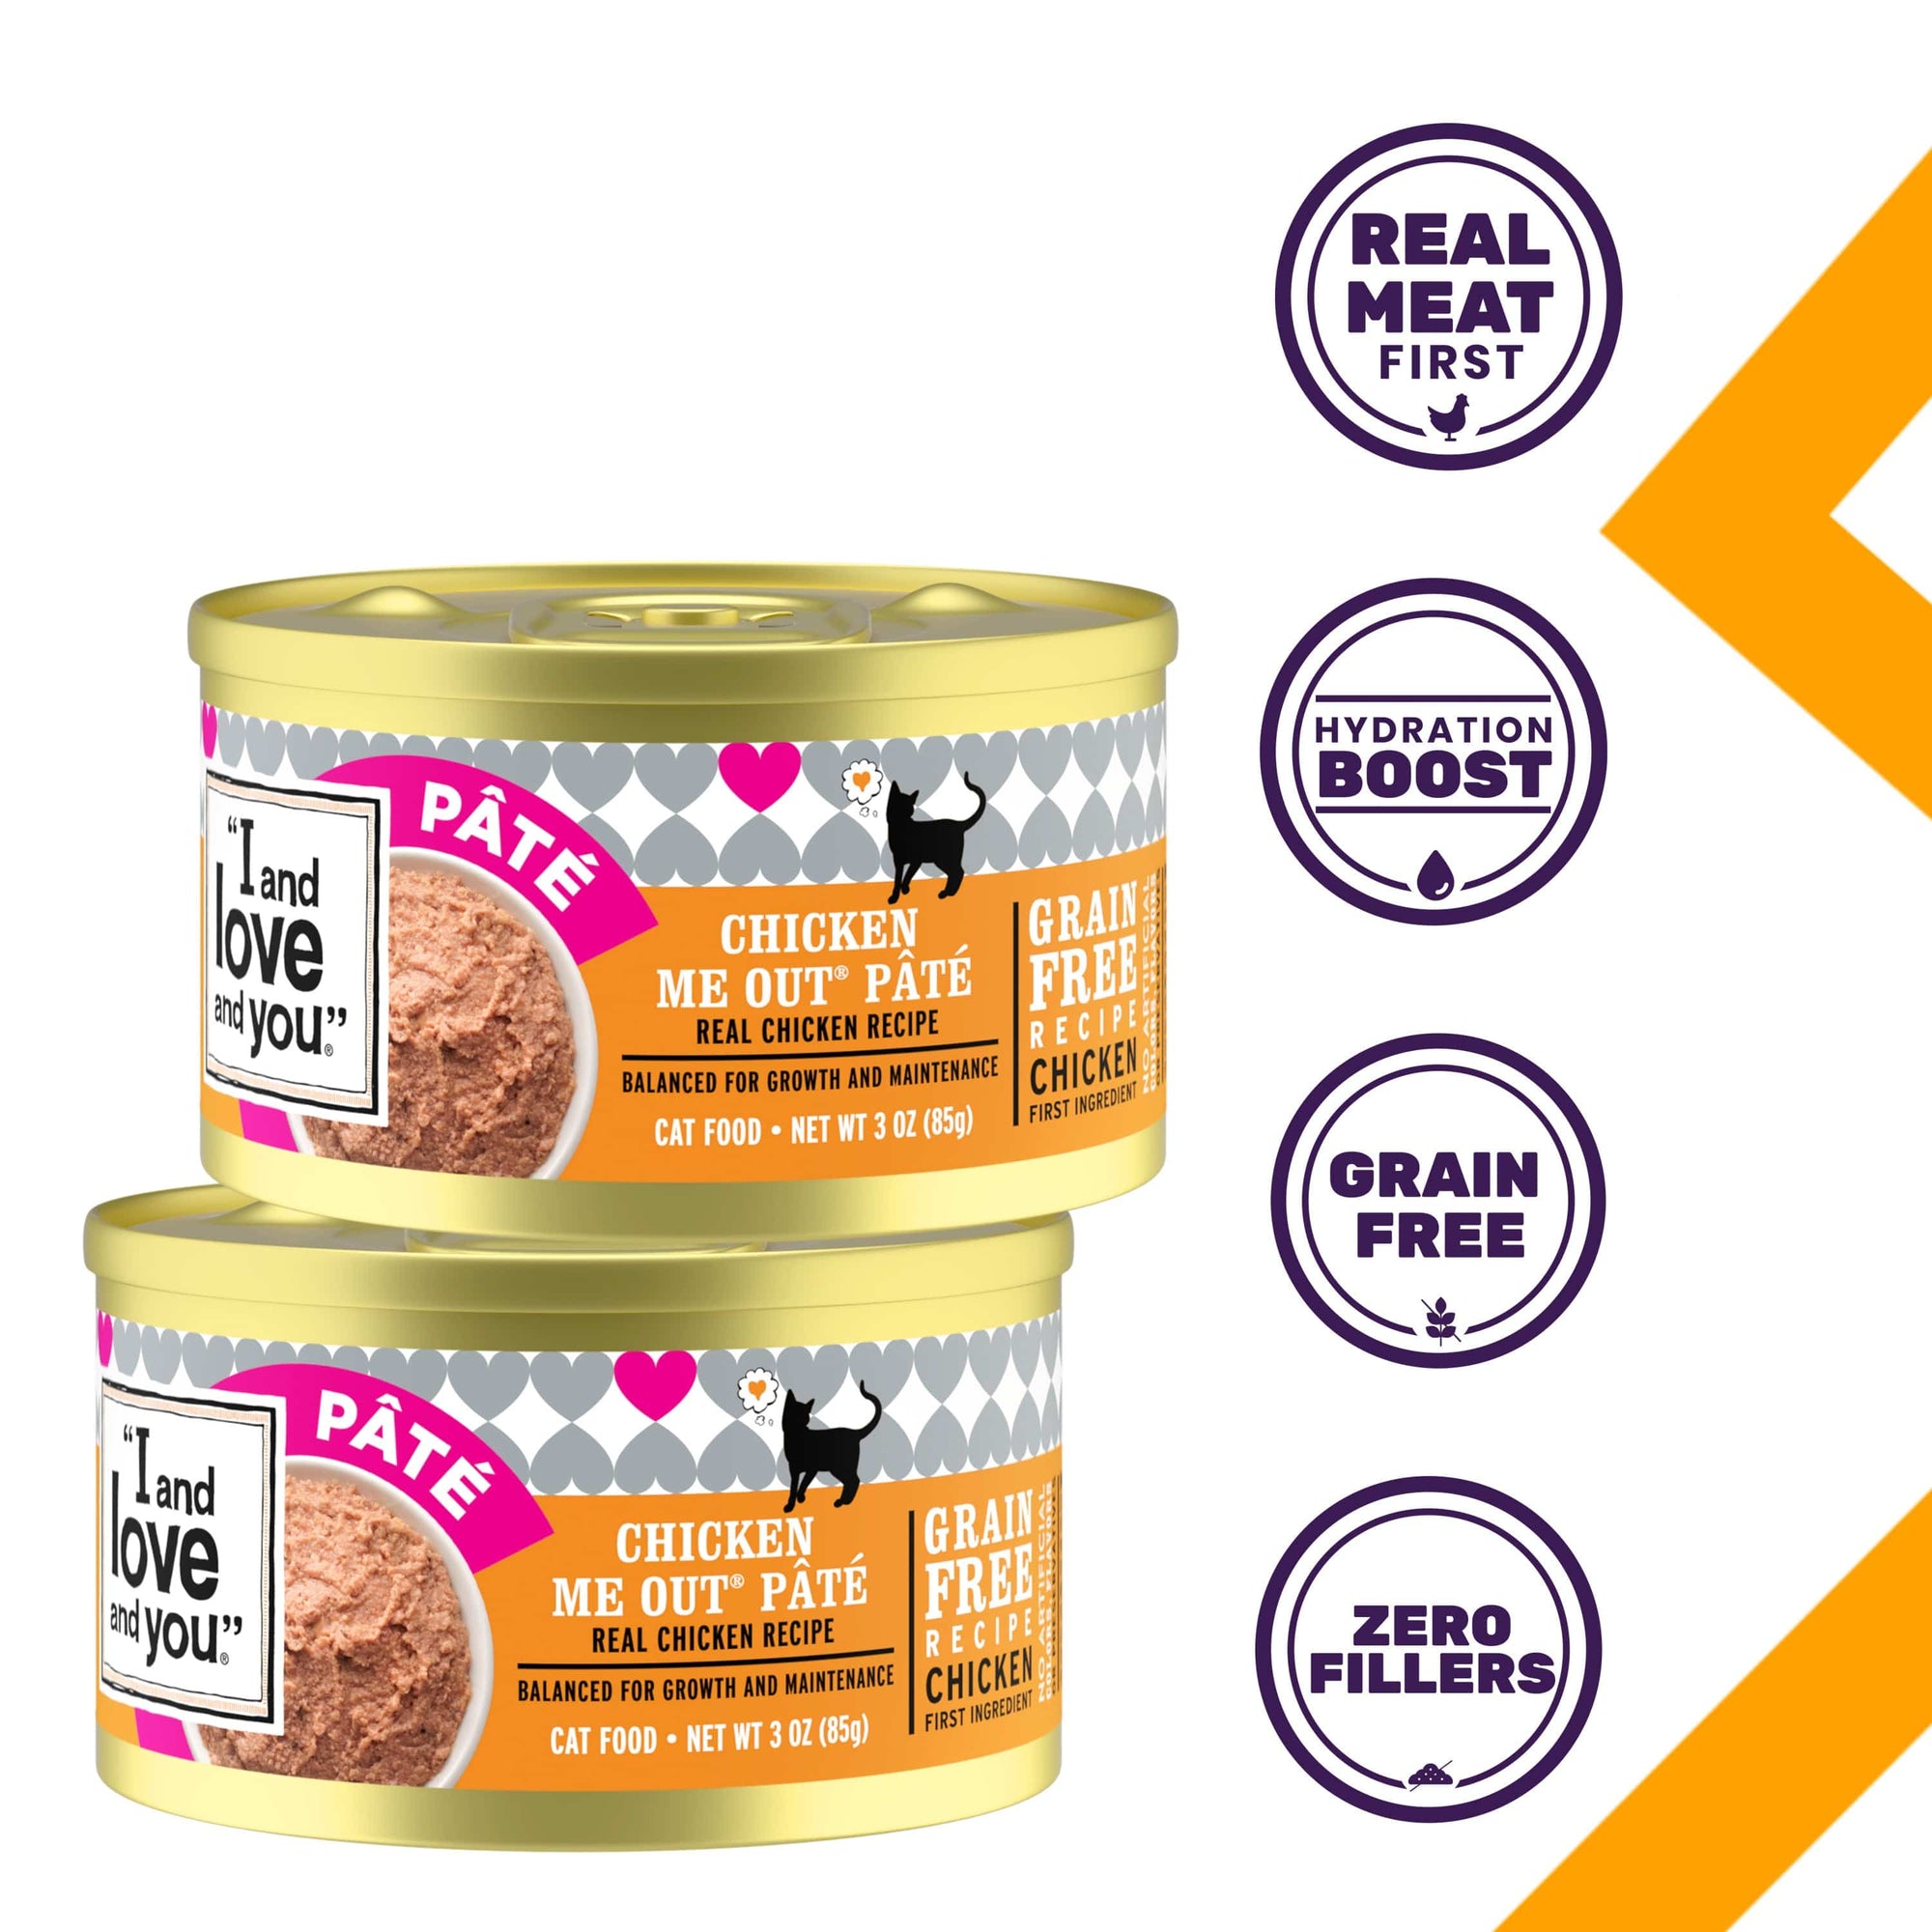 A group of cans of cat food featuring Original Recipe - Chicken Me Out Pâté, showcasing product features such as real meat first, hydration boost, grain free and zero fillers.